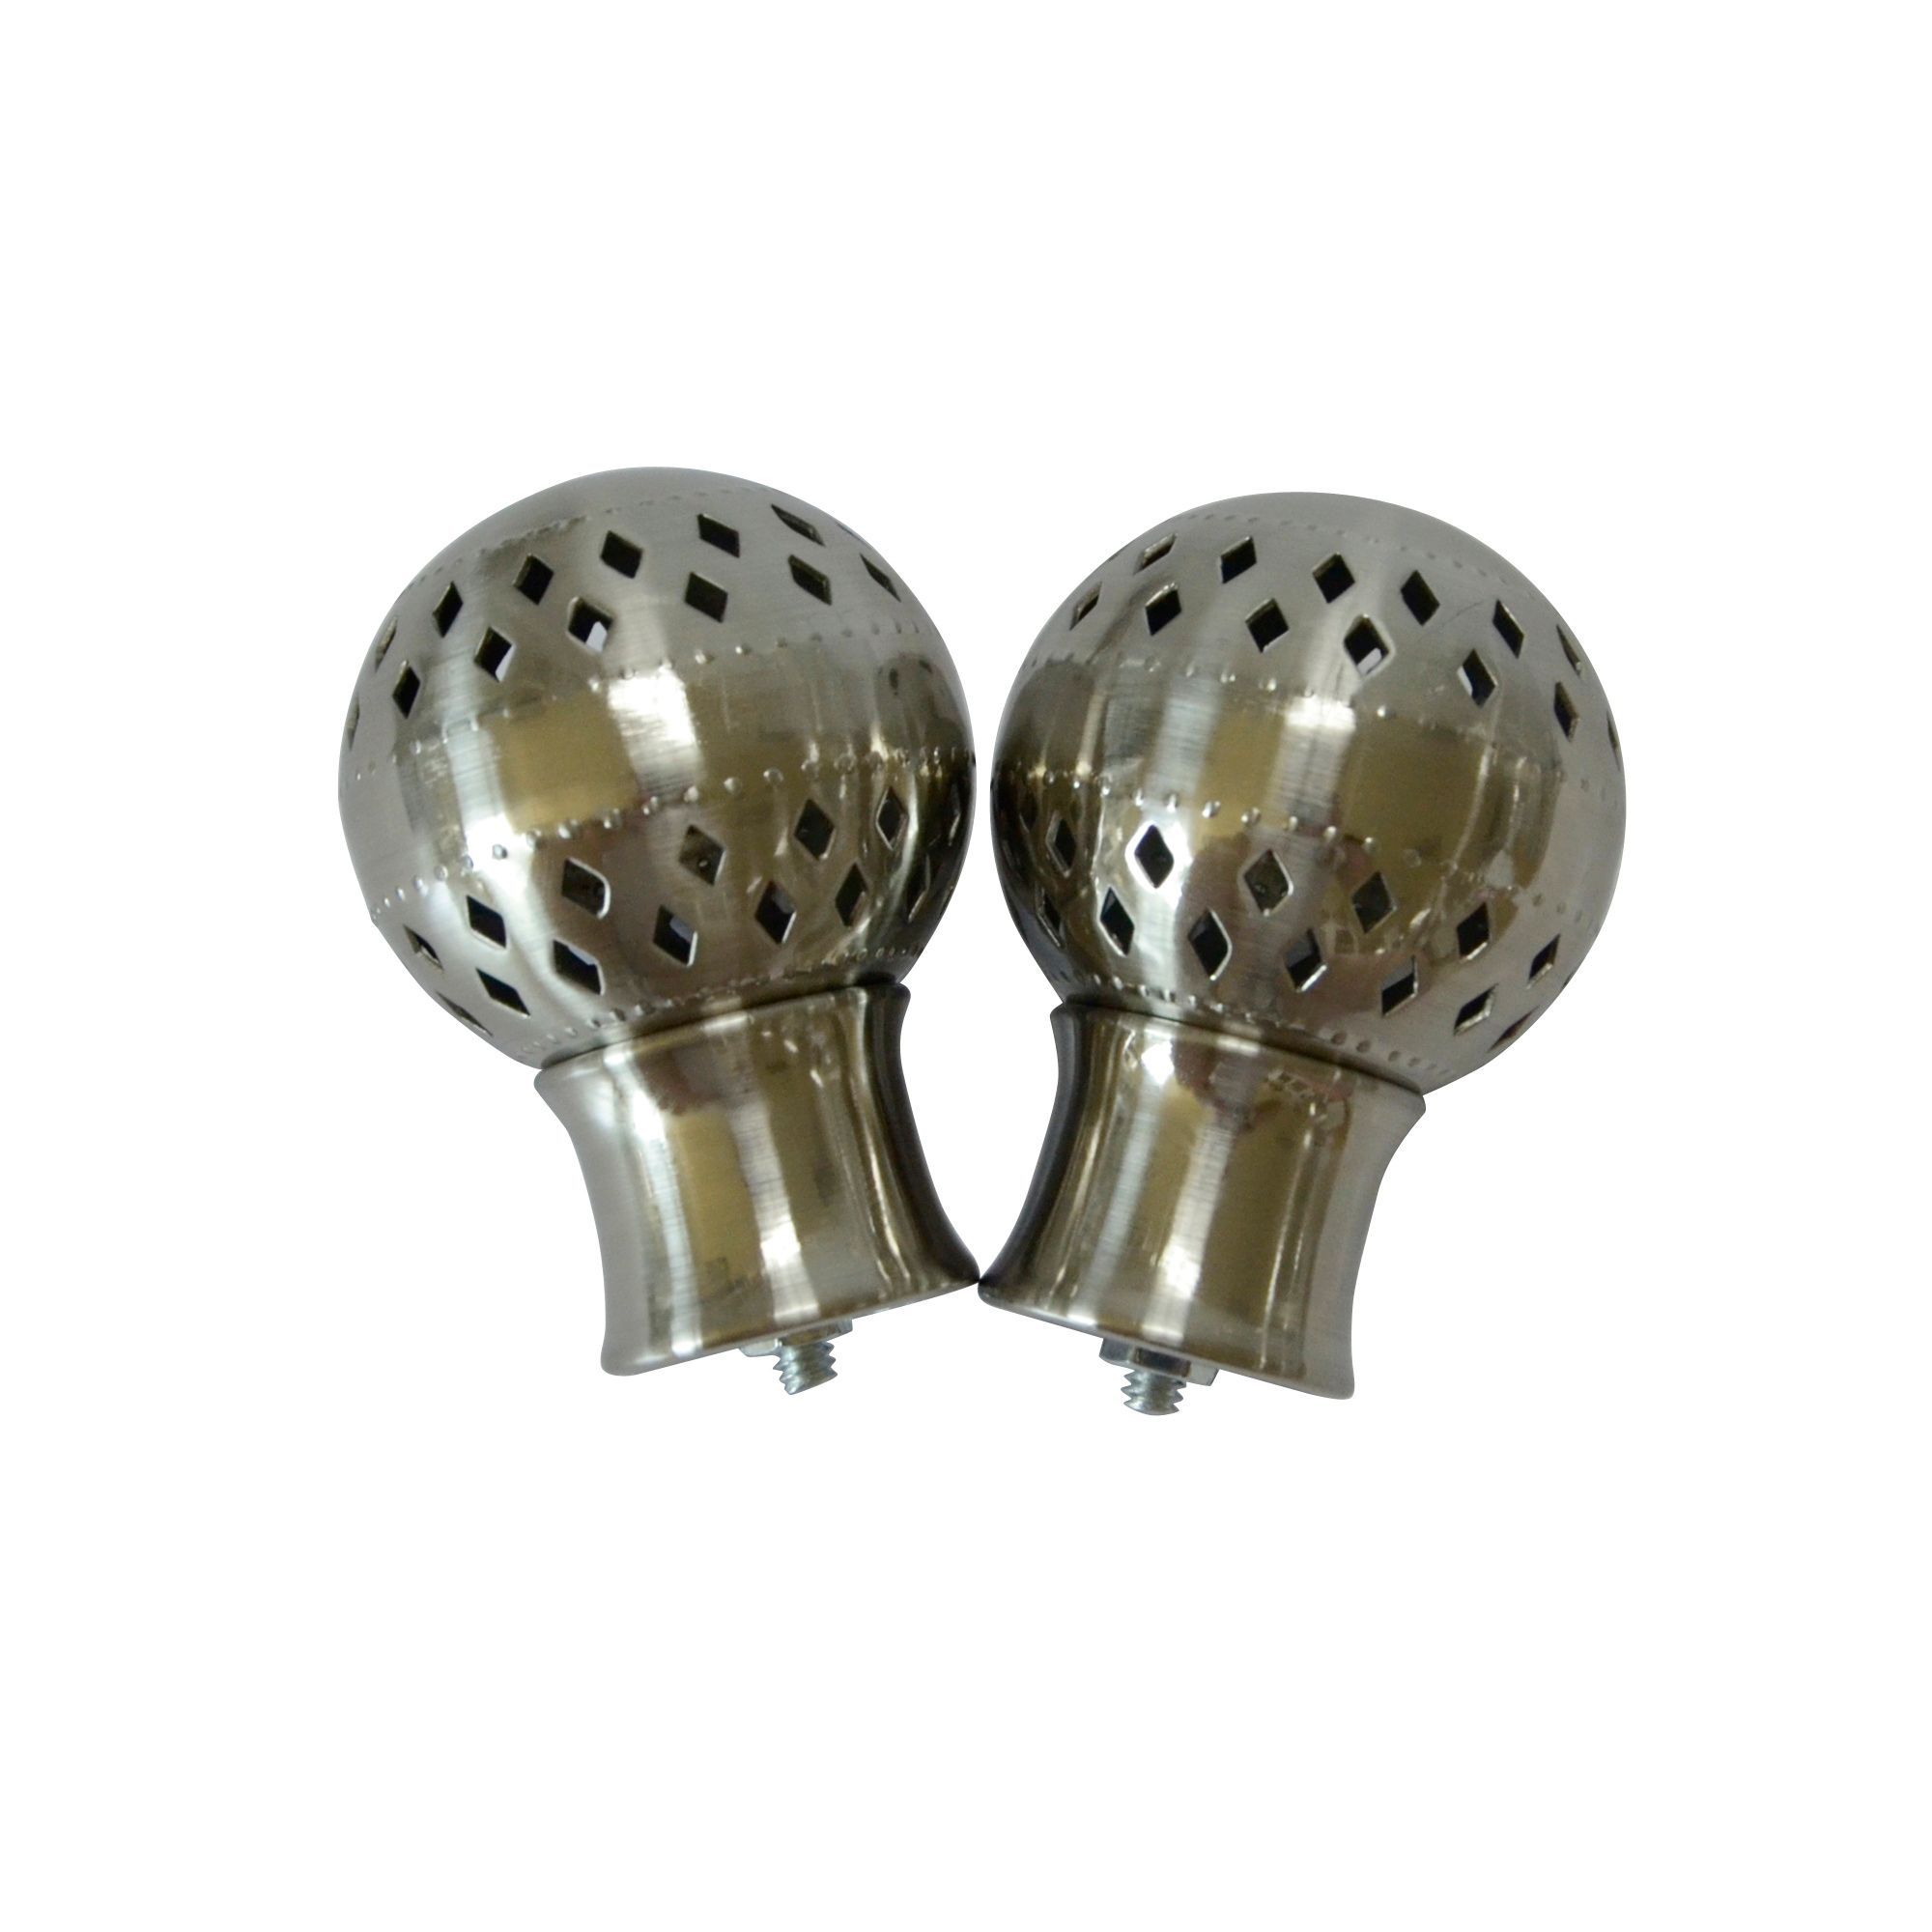 Stainless steel effect Ball Curtain pole finial of 2